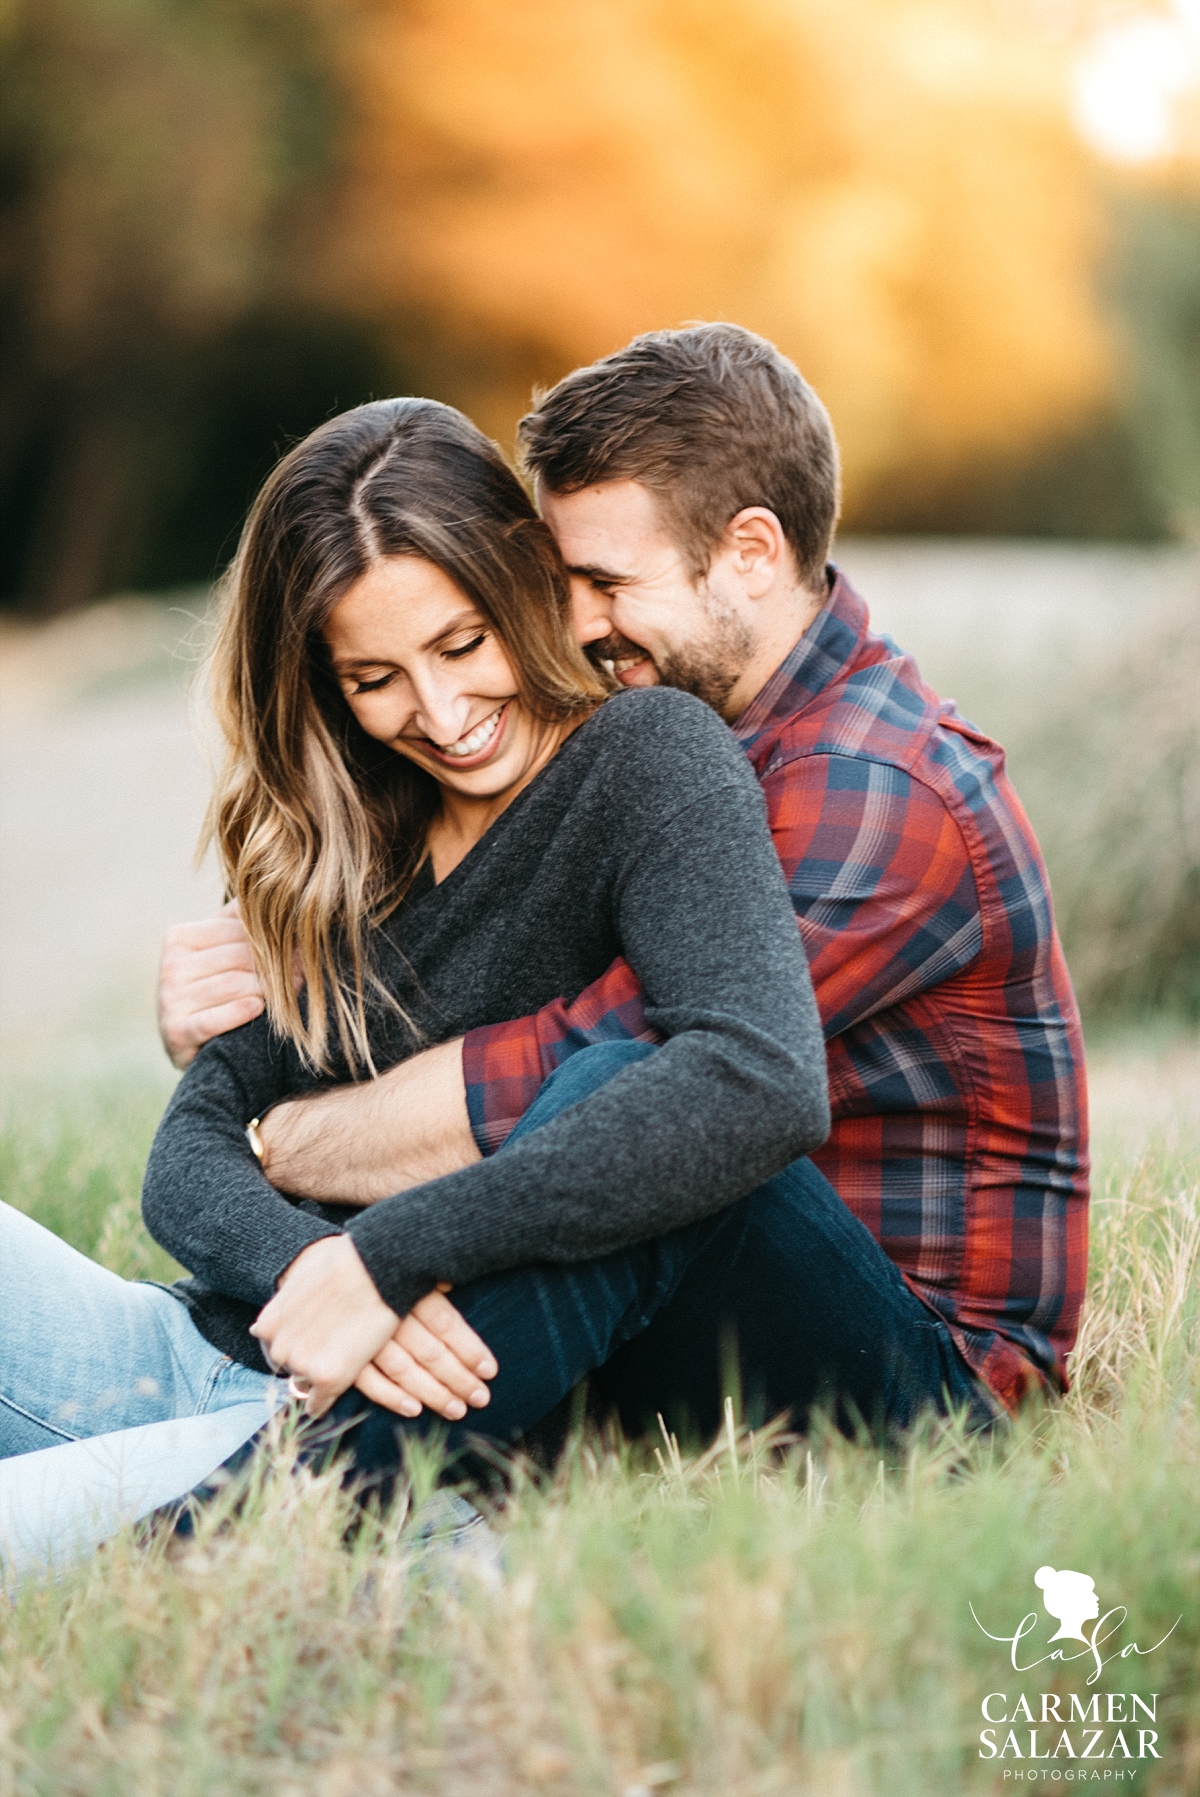 Silly and romantic engagement session - Carmen Salazar